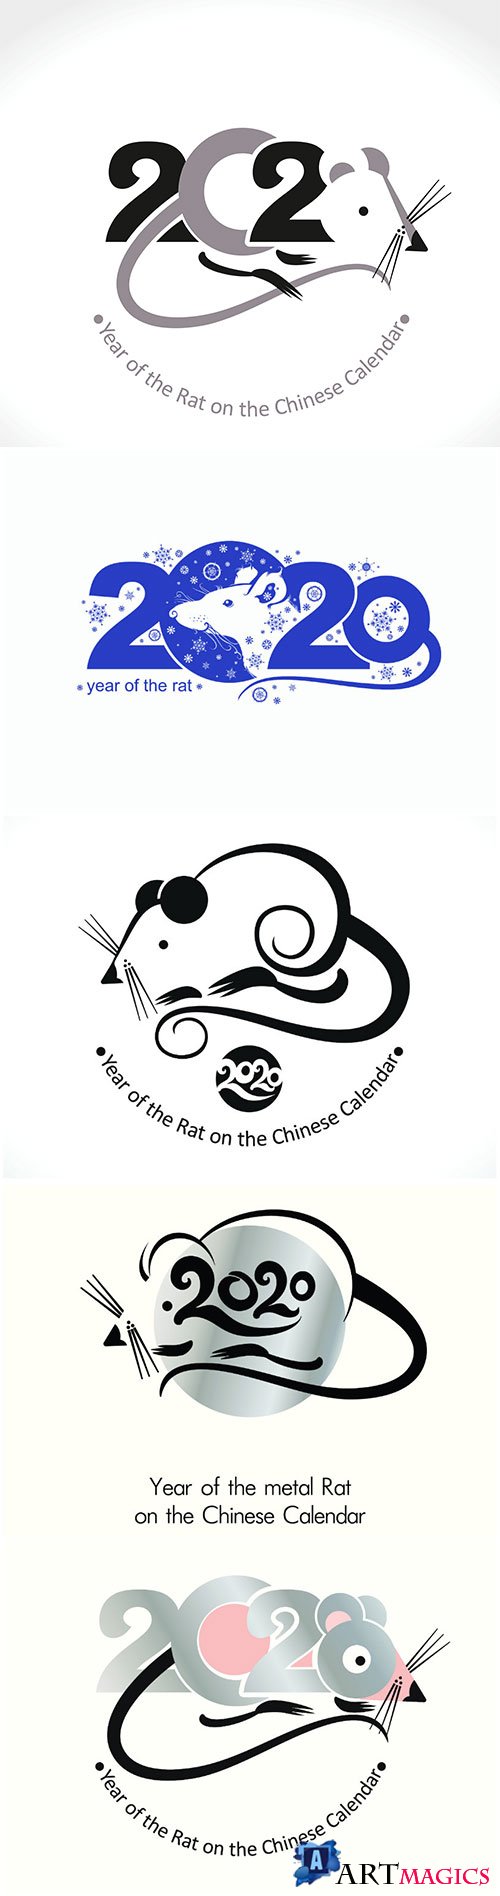 Year of the Rat 2020, vector template New Year's design on the Chinese calendar